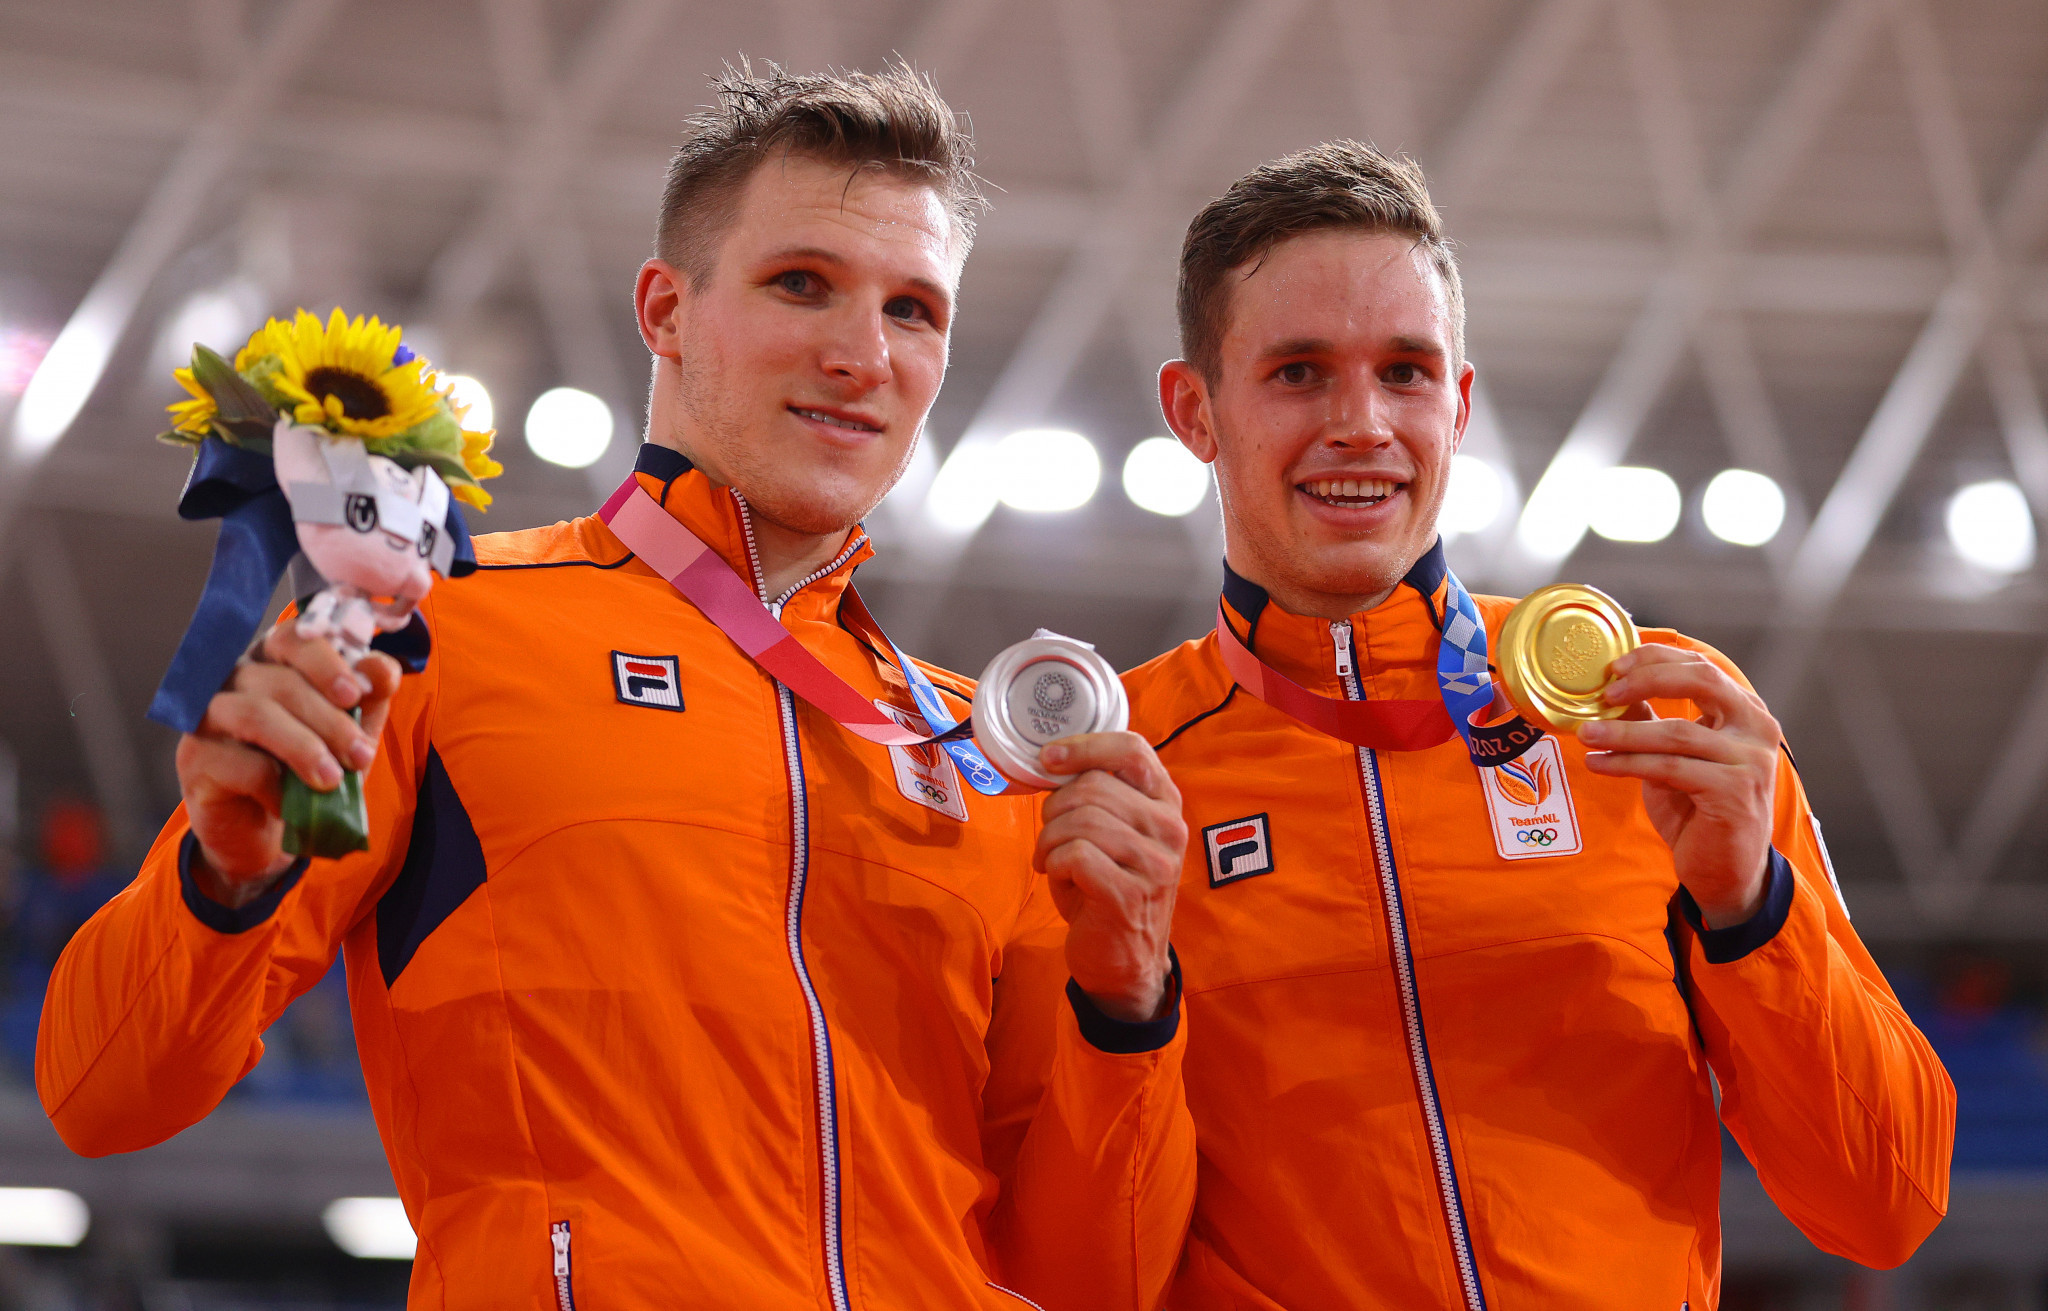 Jeffrey Hoogland, left, and Harrie Lavreysen won sprint silver and gold respectively in a brilliant Tokyo 2020 Games for the Dutch cycling team ©Getty Images